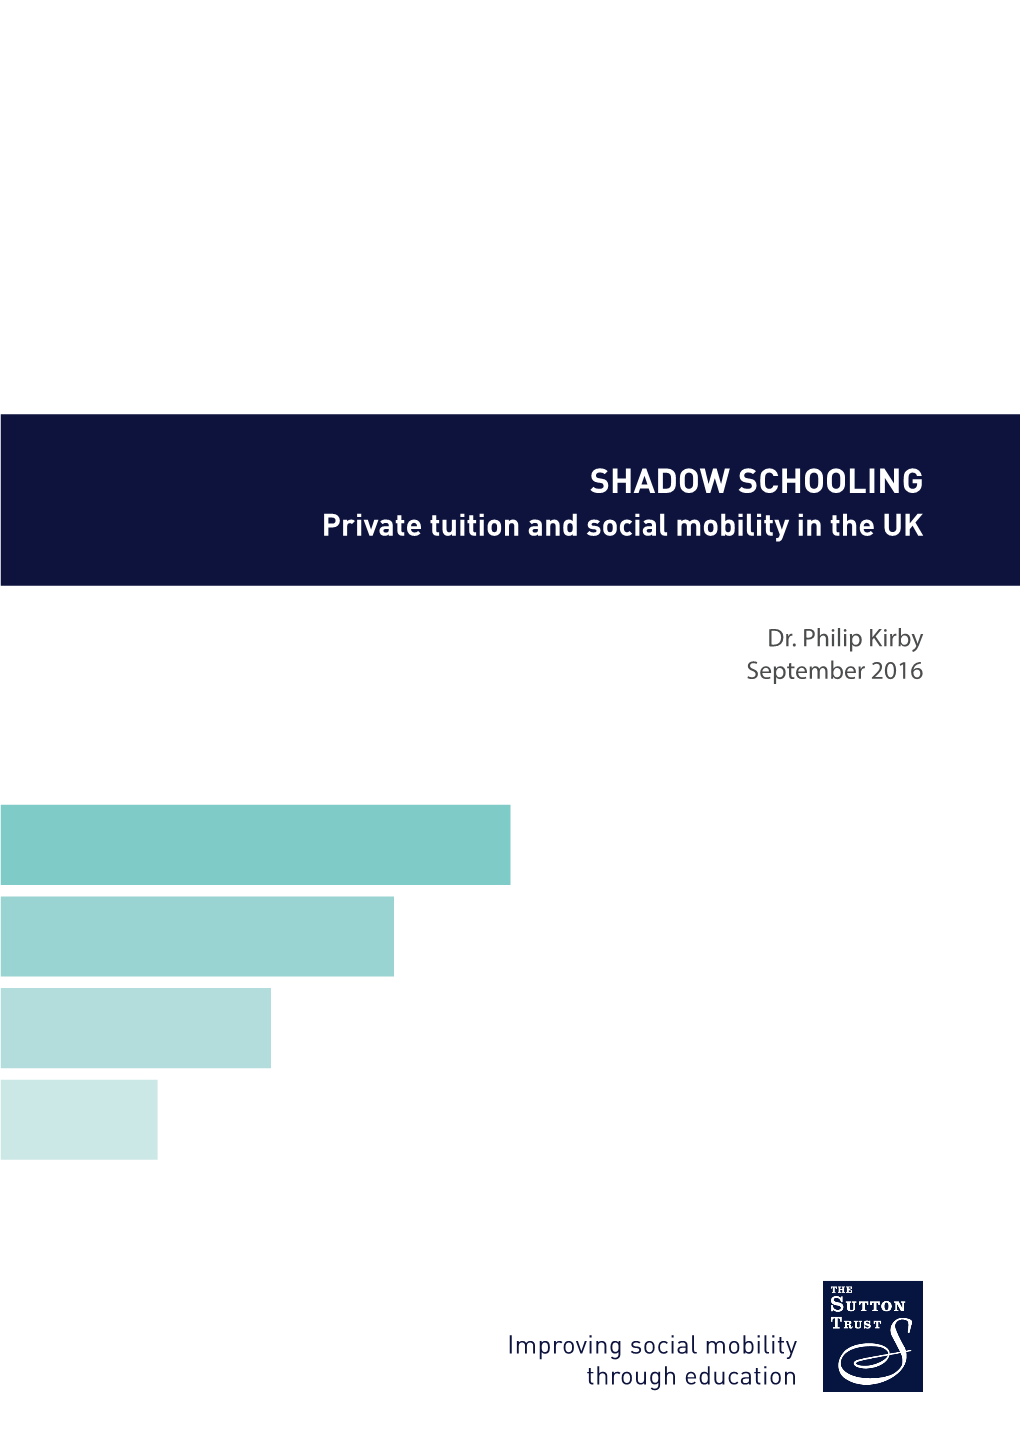 SHADOW SCHOOLING Private Tuition and Social Mobility in the UK